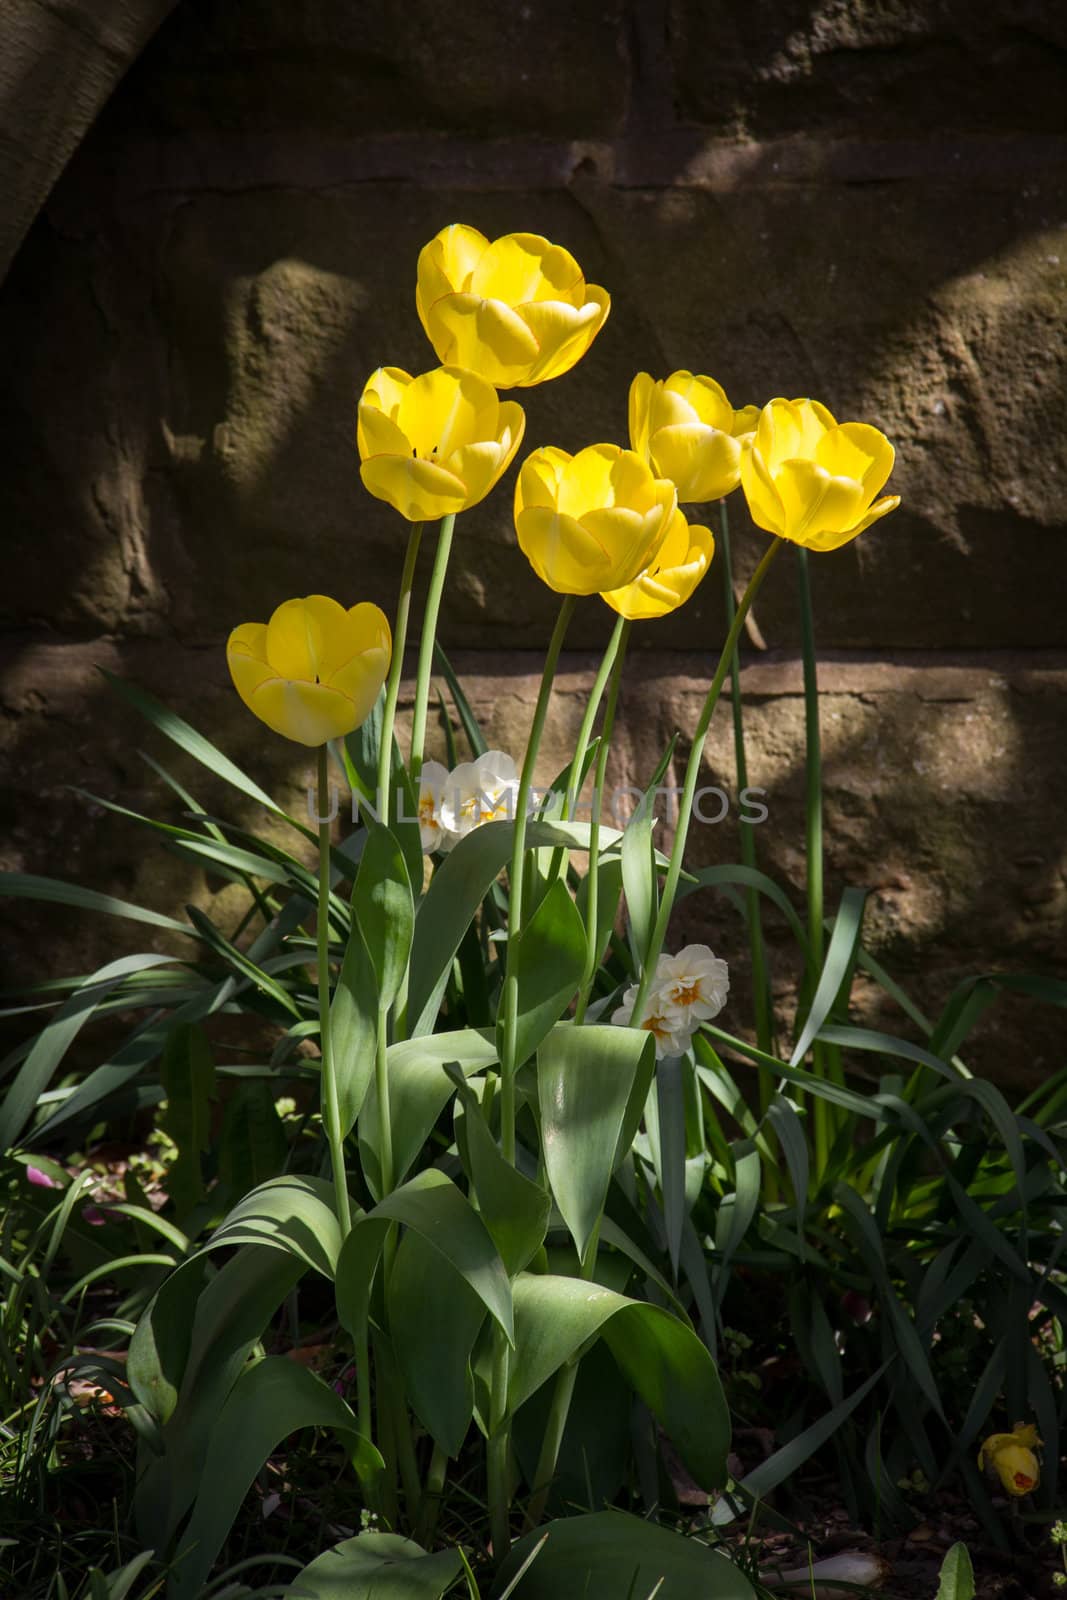 Lovely Yellow Tulips by Downart